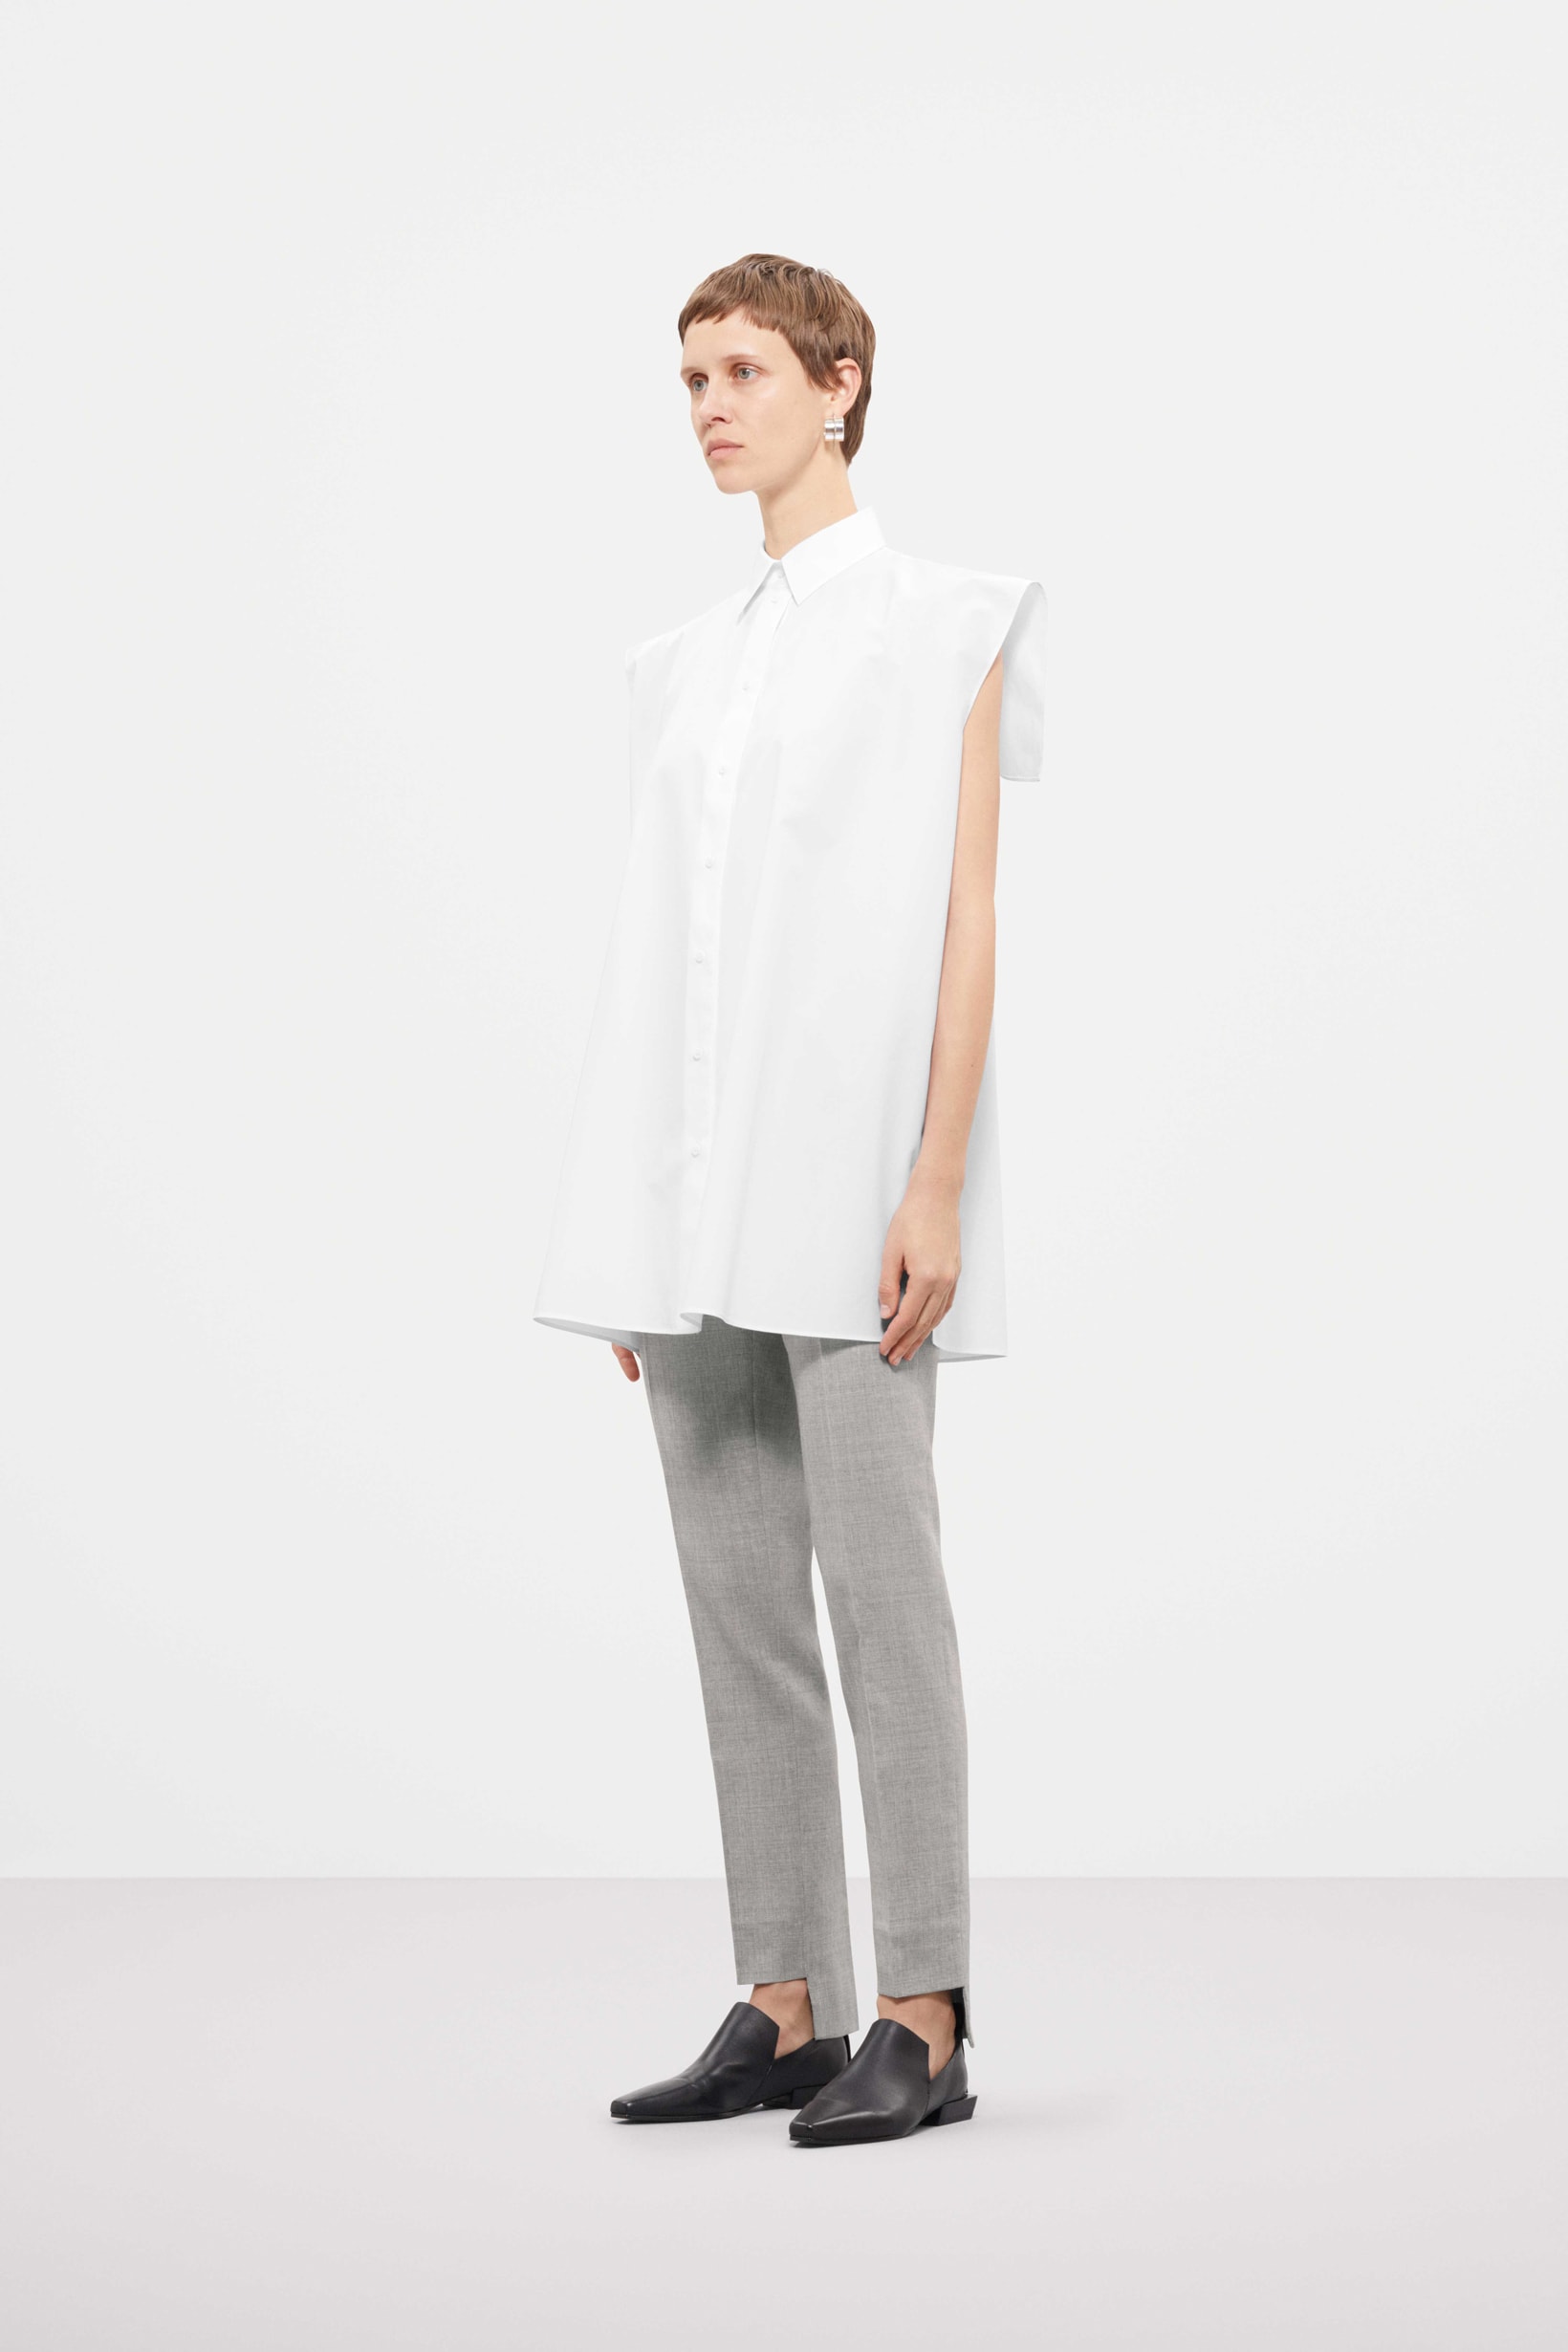 Cos Fall Winter 2019 Lookbook Top White Pants Grey Shoes Black